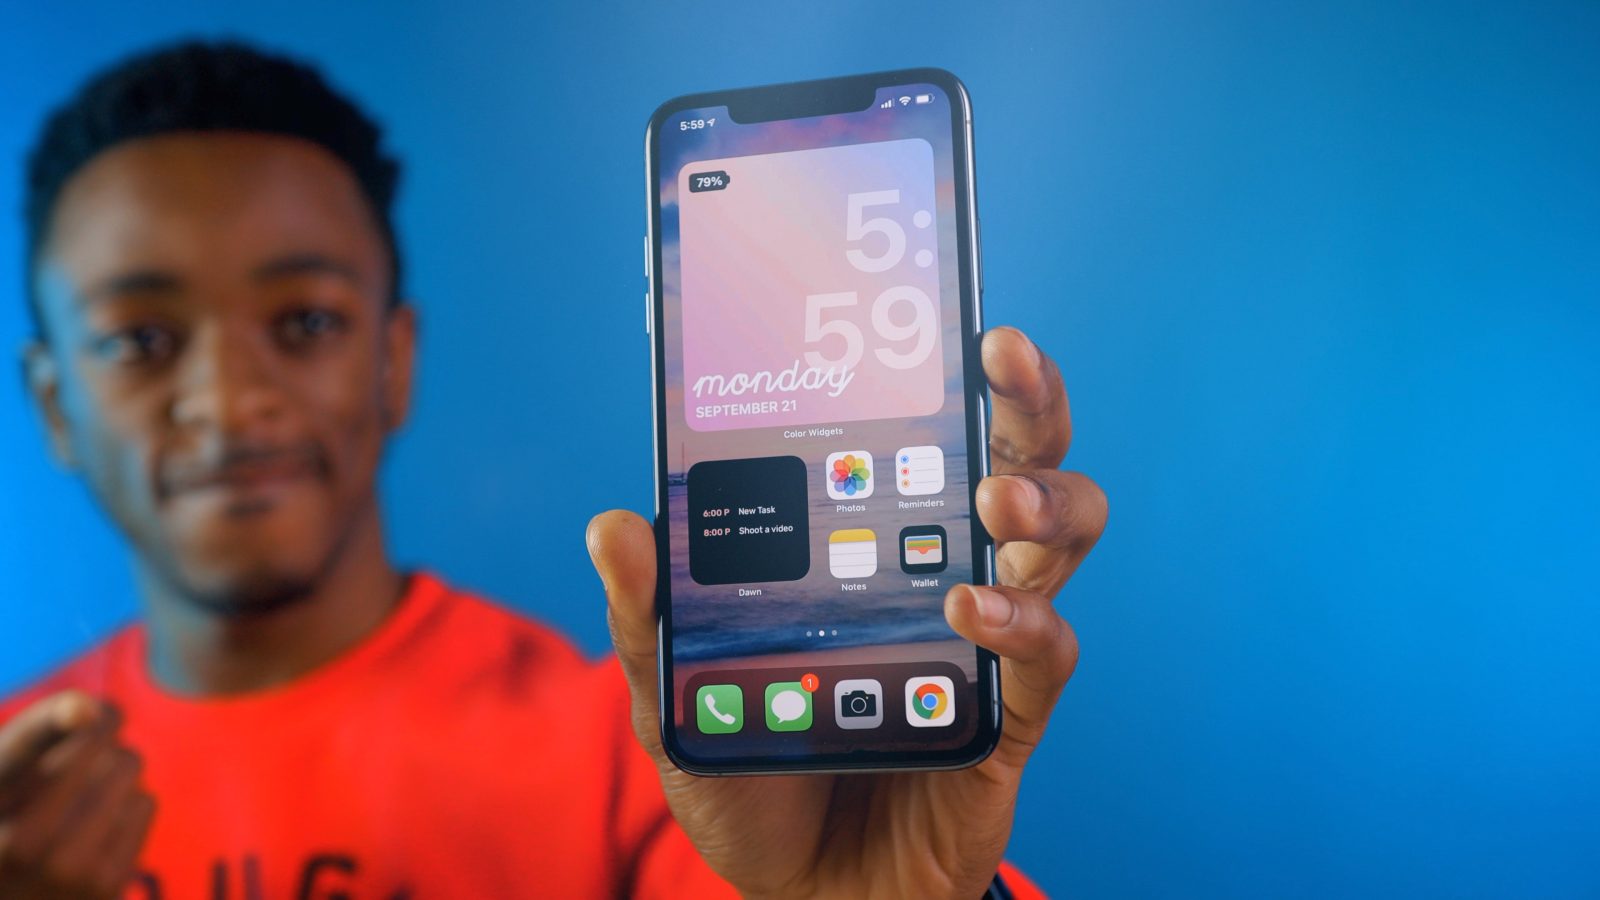 iOS 14 homescreens are great, but easier on Android - 9to5Google